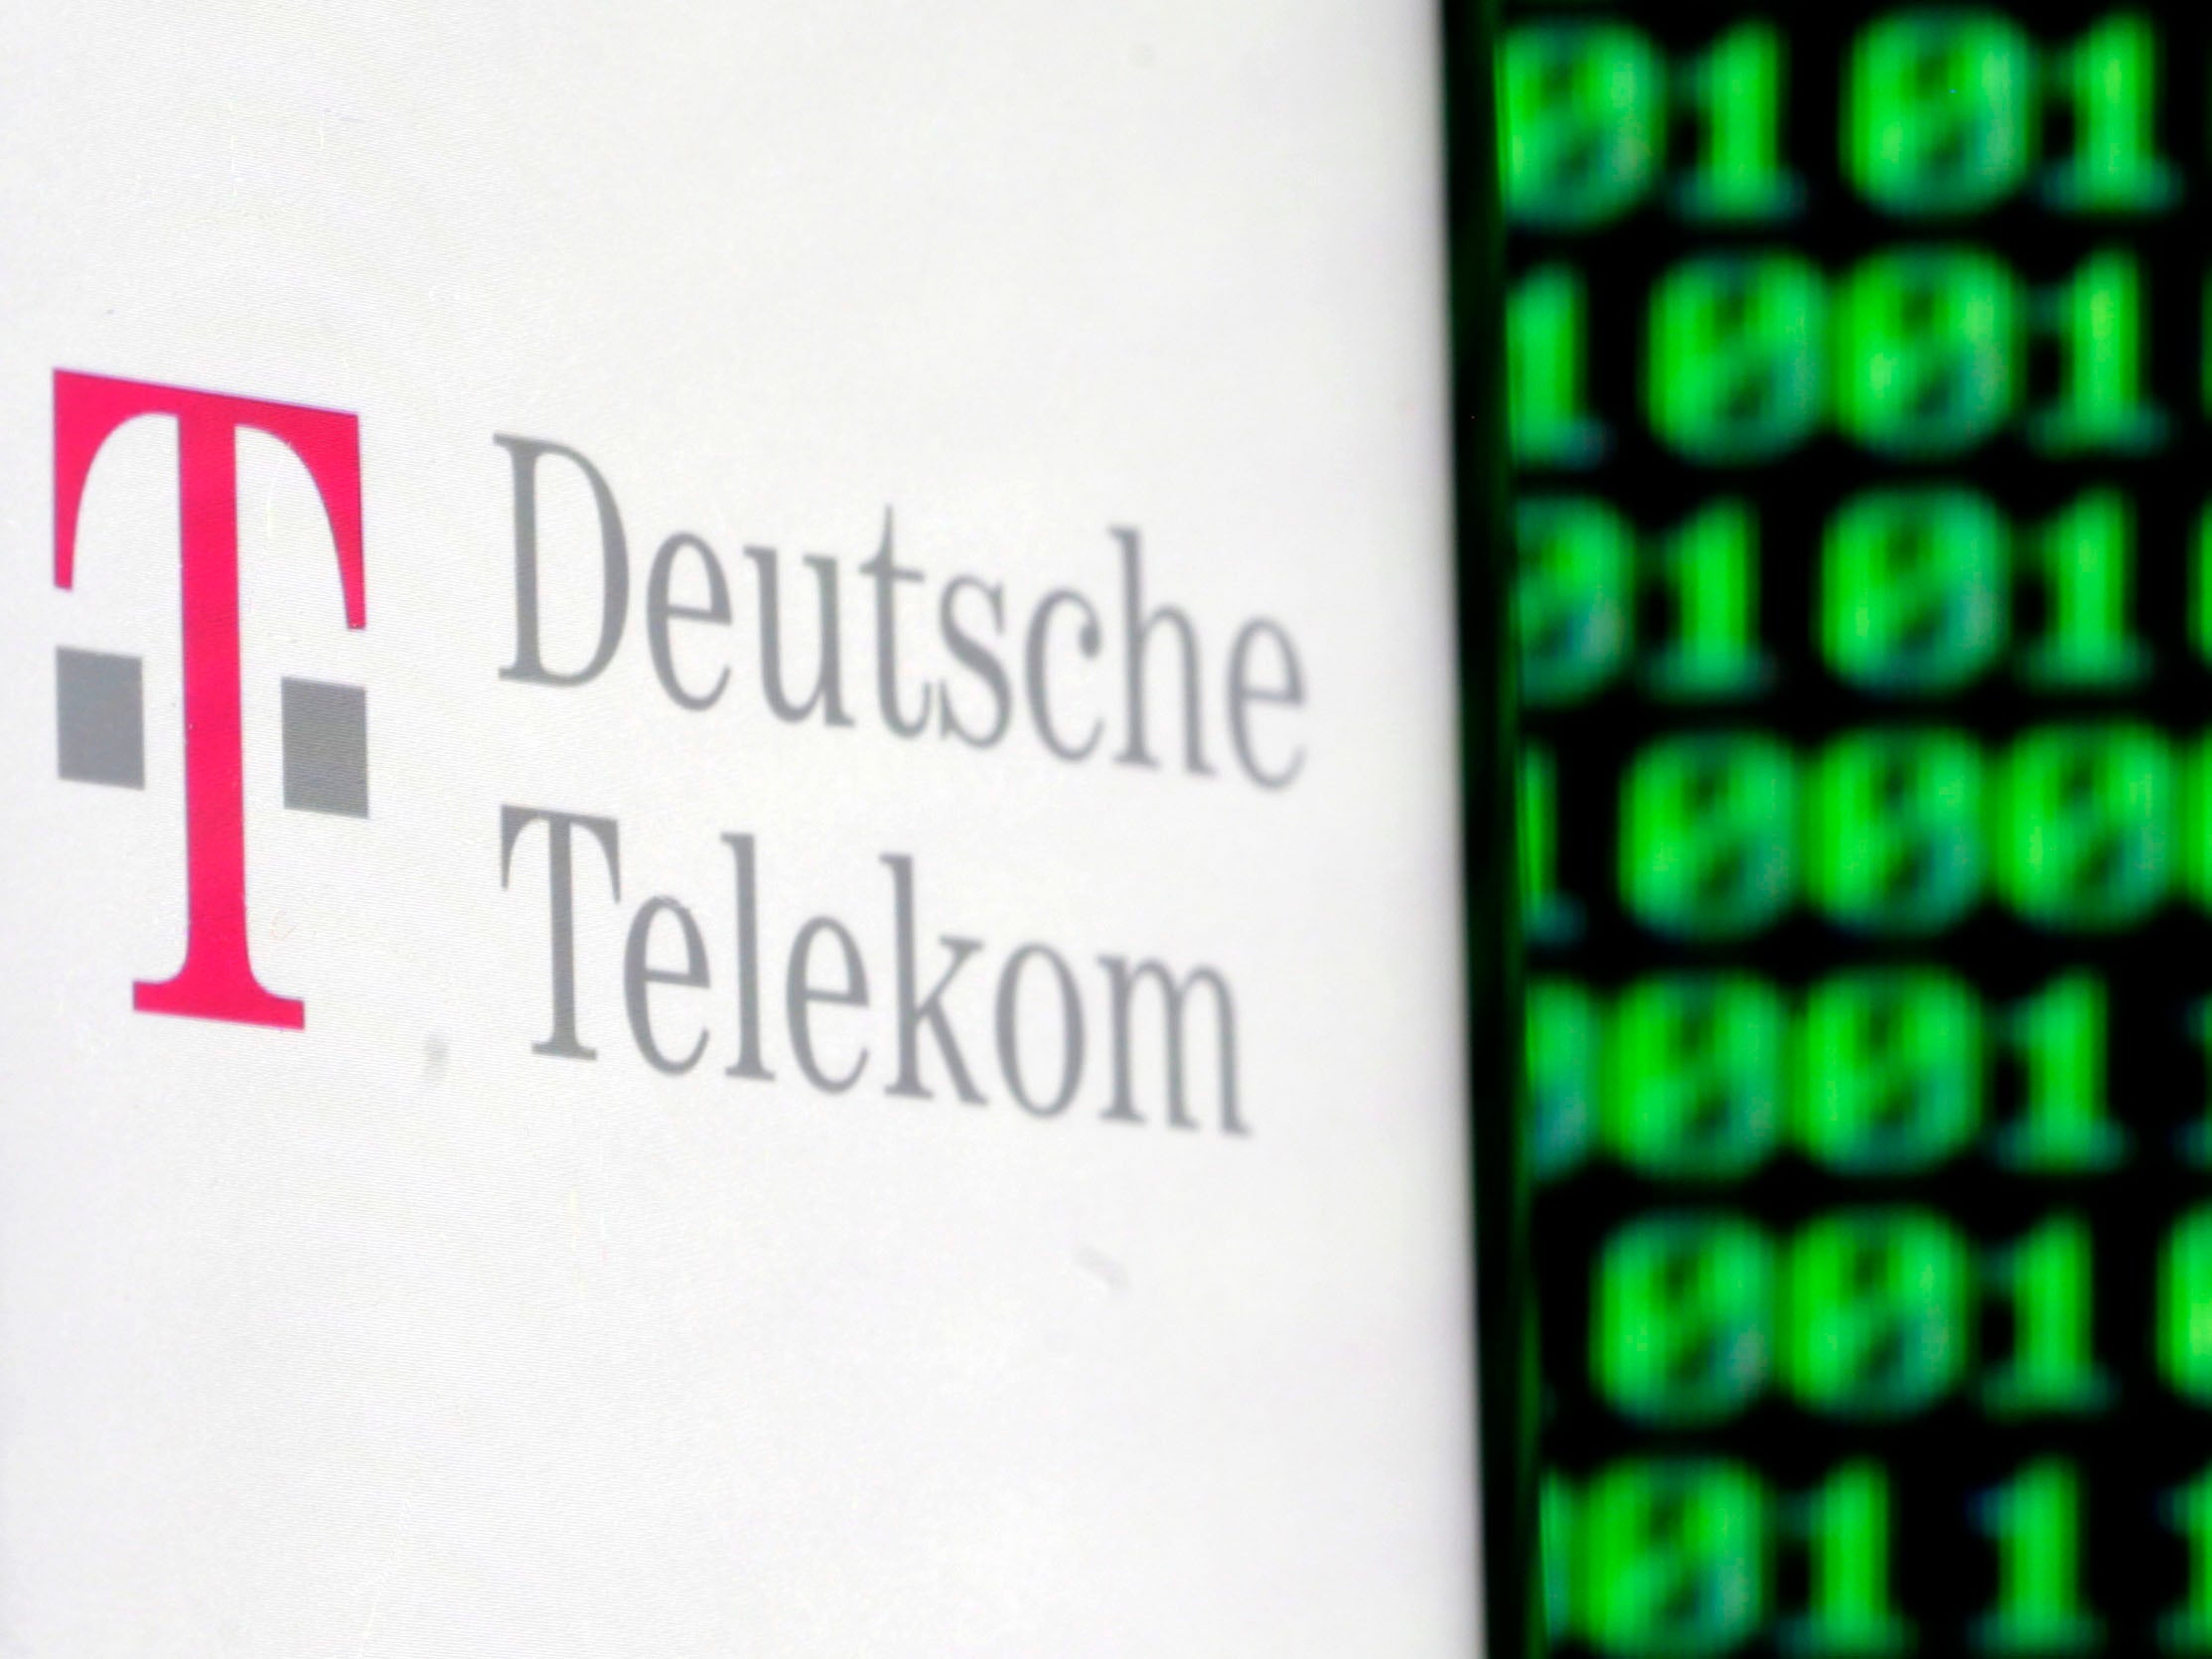 Last year’s attack on Germany’s largest telecommunications company reportedly led to internet outages for up to 900,000 users